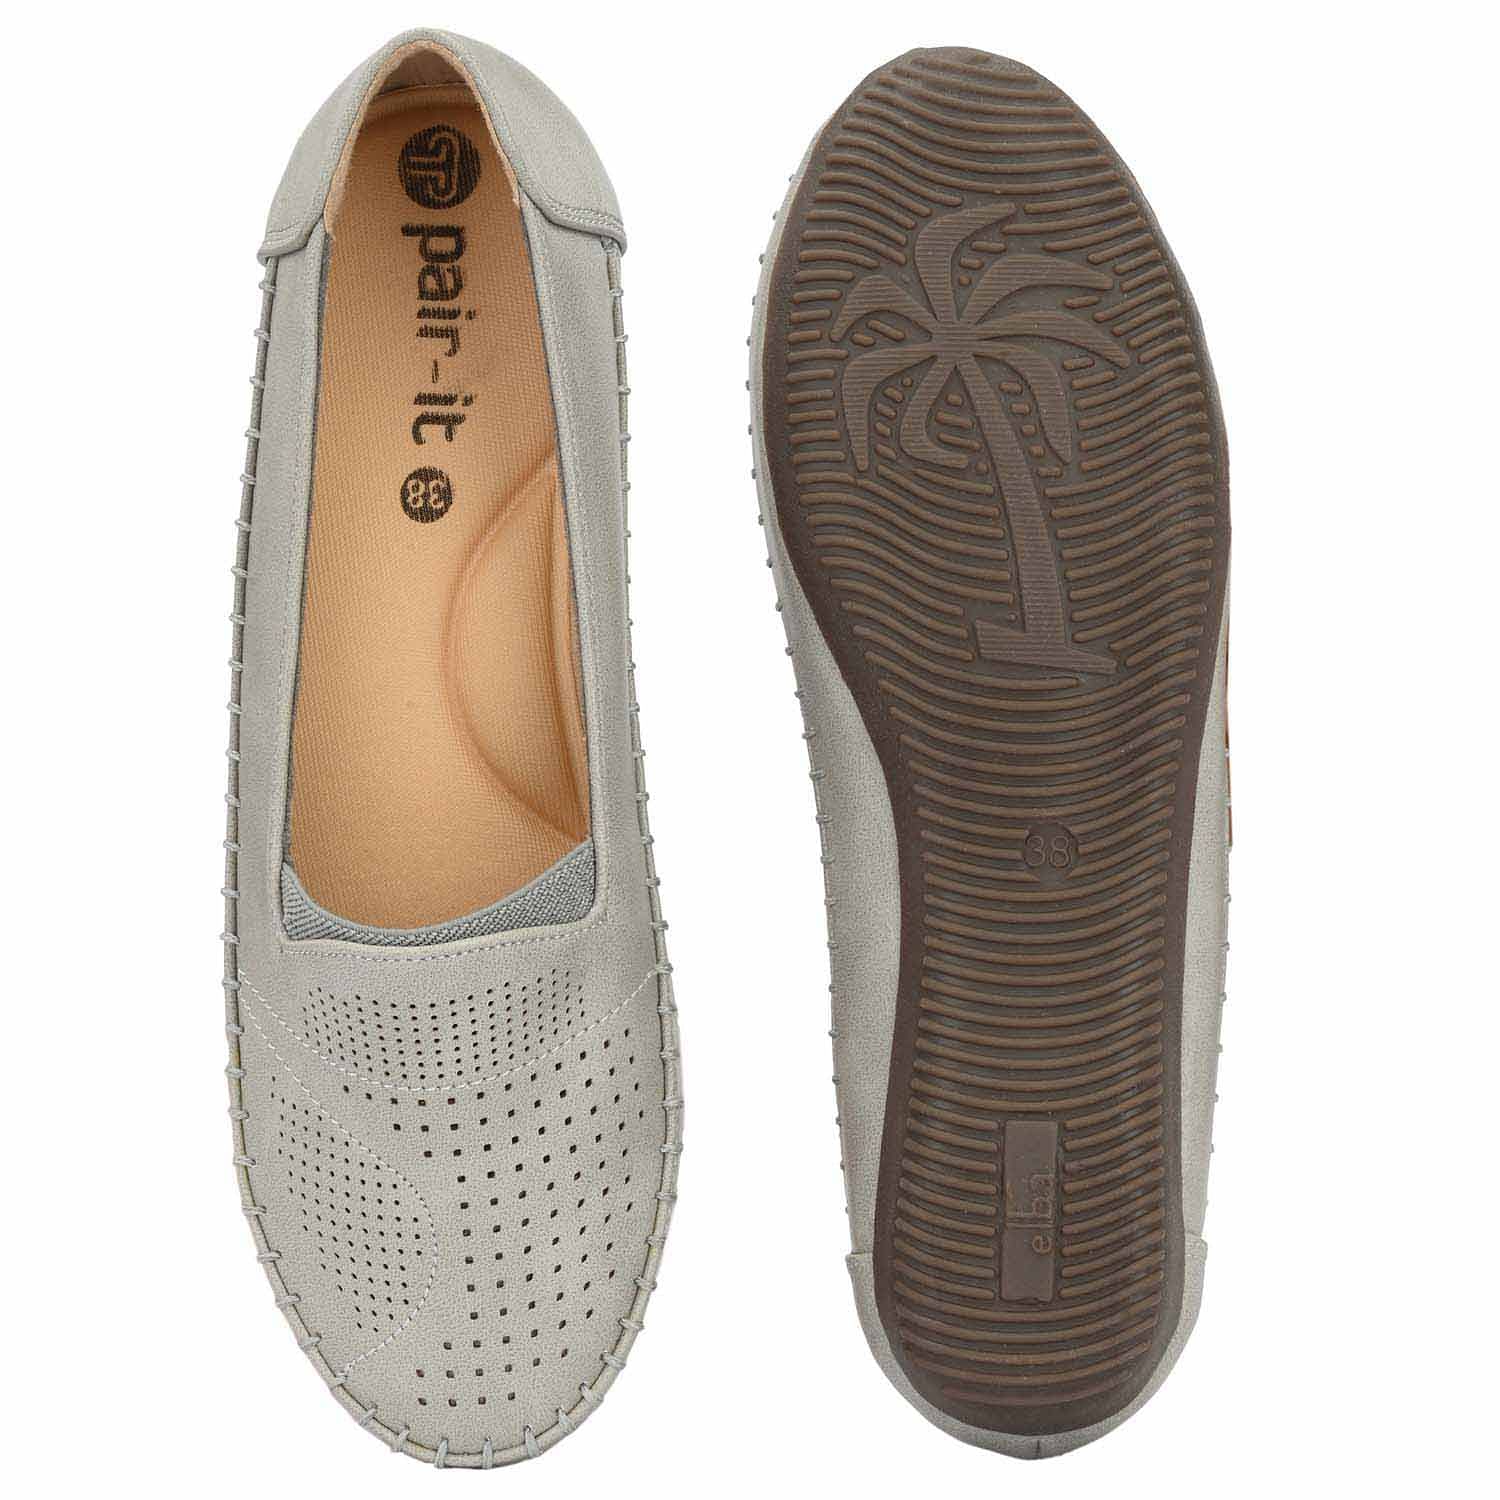 Pair-it Wmn Formal Belly-IMP-WMN-Loafers-211-Grey